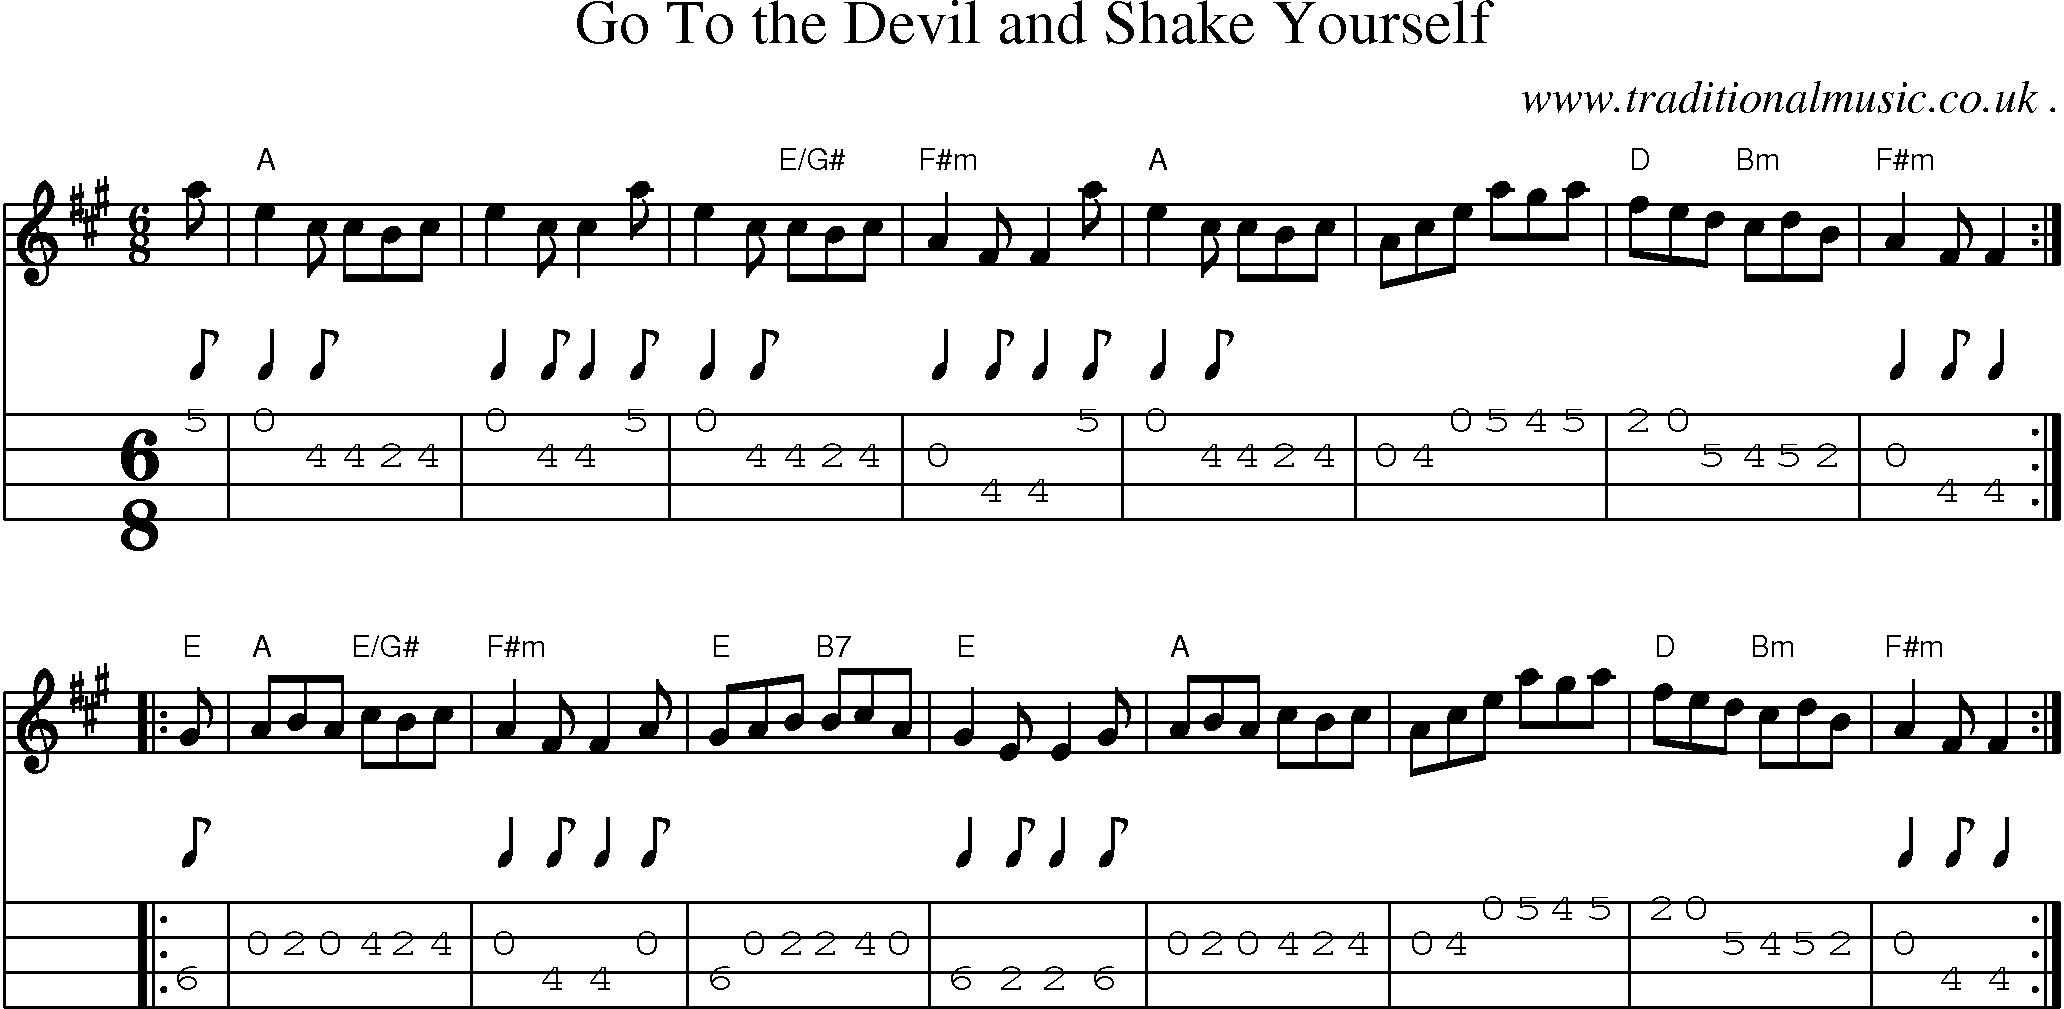 Sheet-music  score, Chords and Mandolin Tabs for Go To The Devil And Shake Yourself